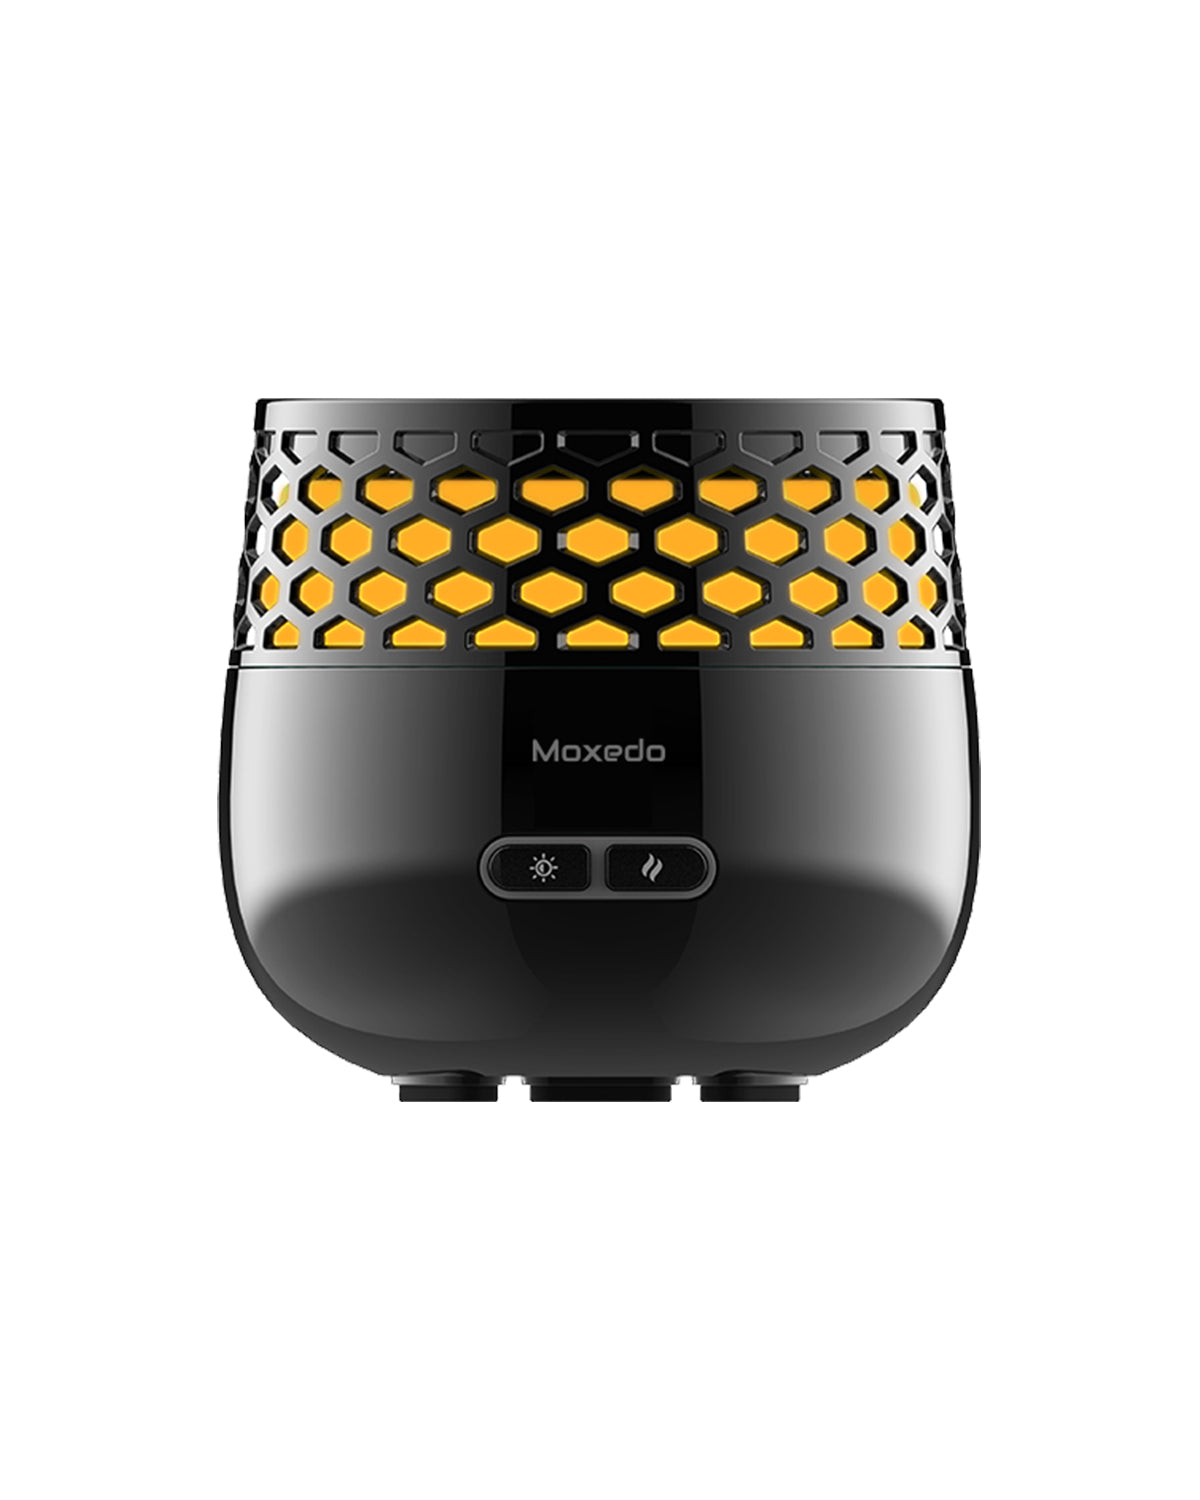 Moxedo Electric Incense Burner Portable Aroma Diffuser with 7 Colors LED Lights - Black